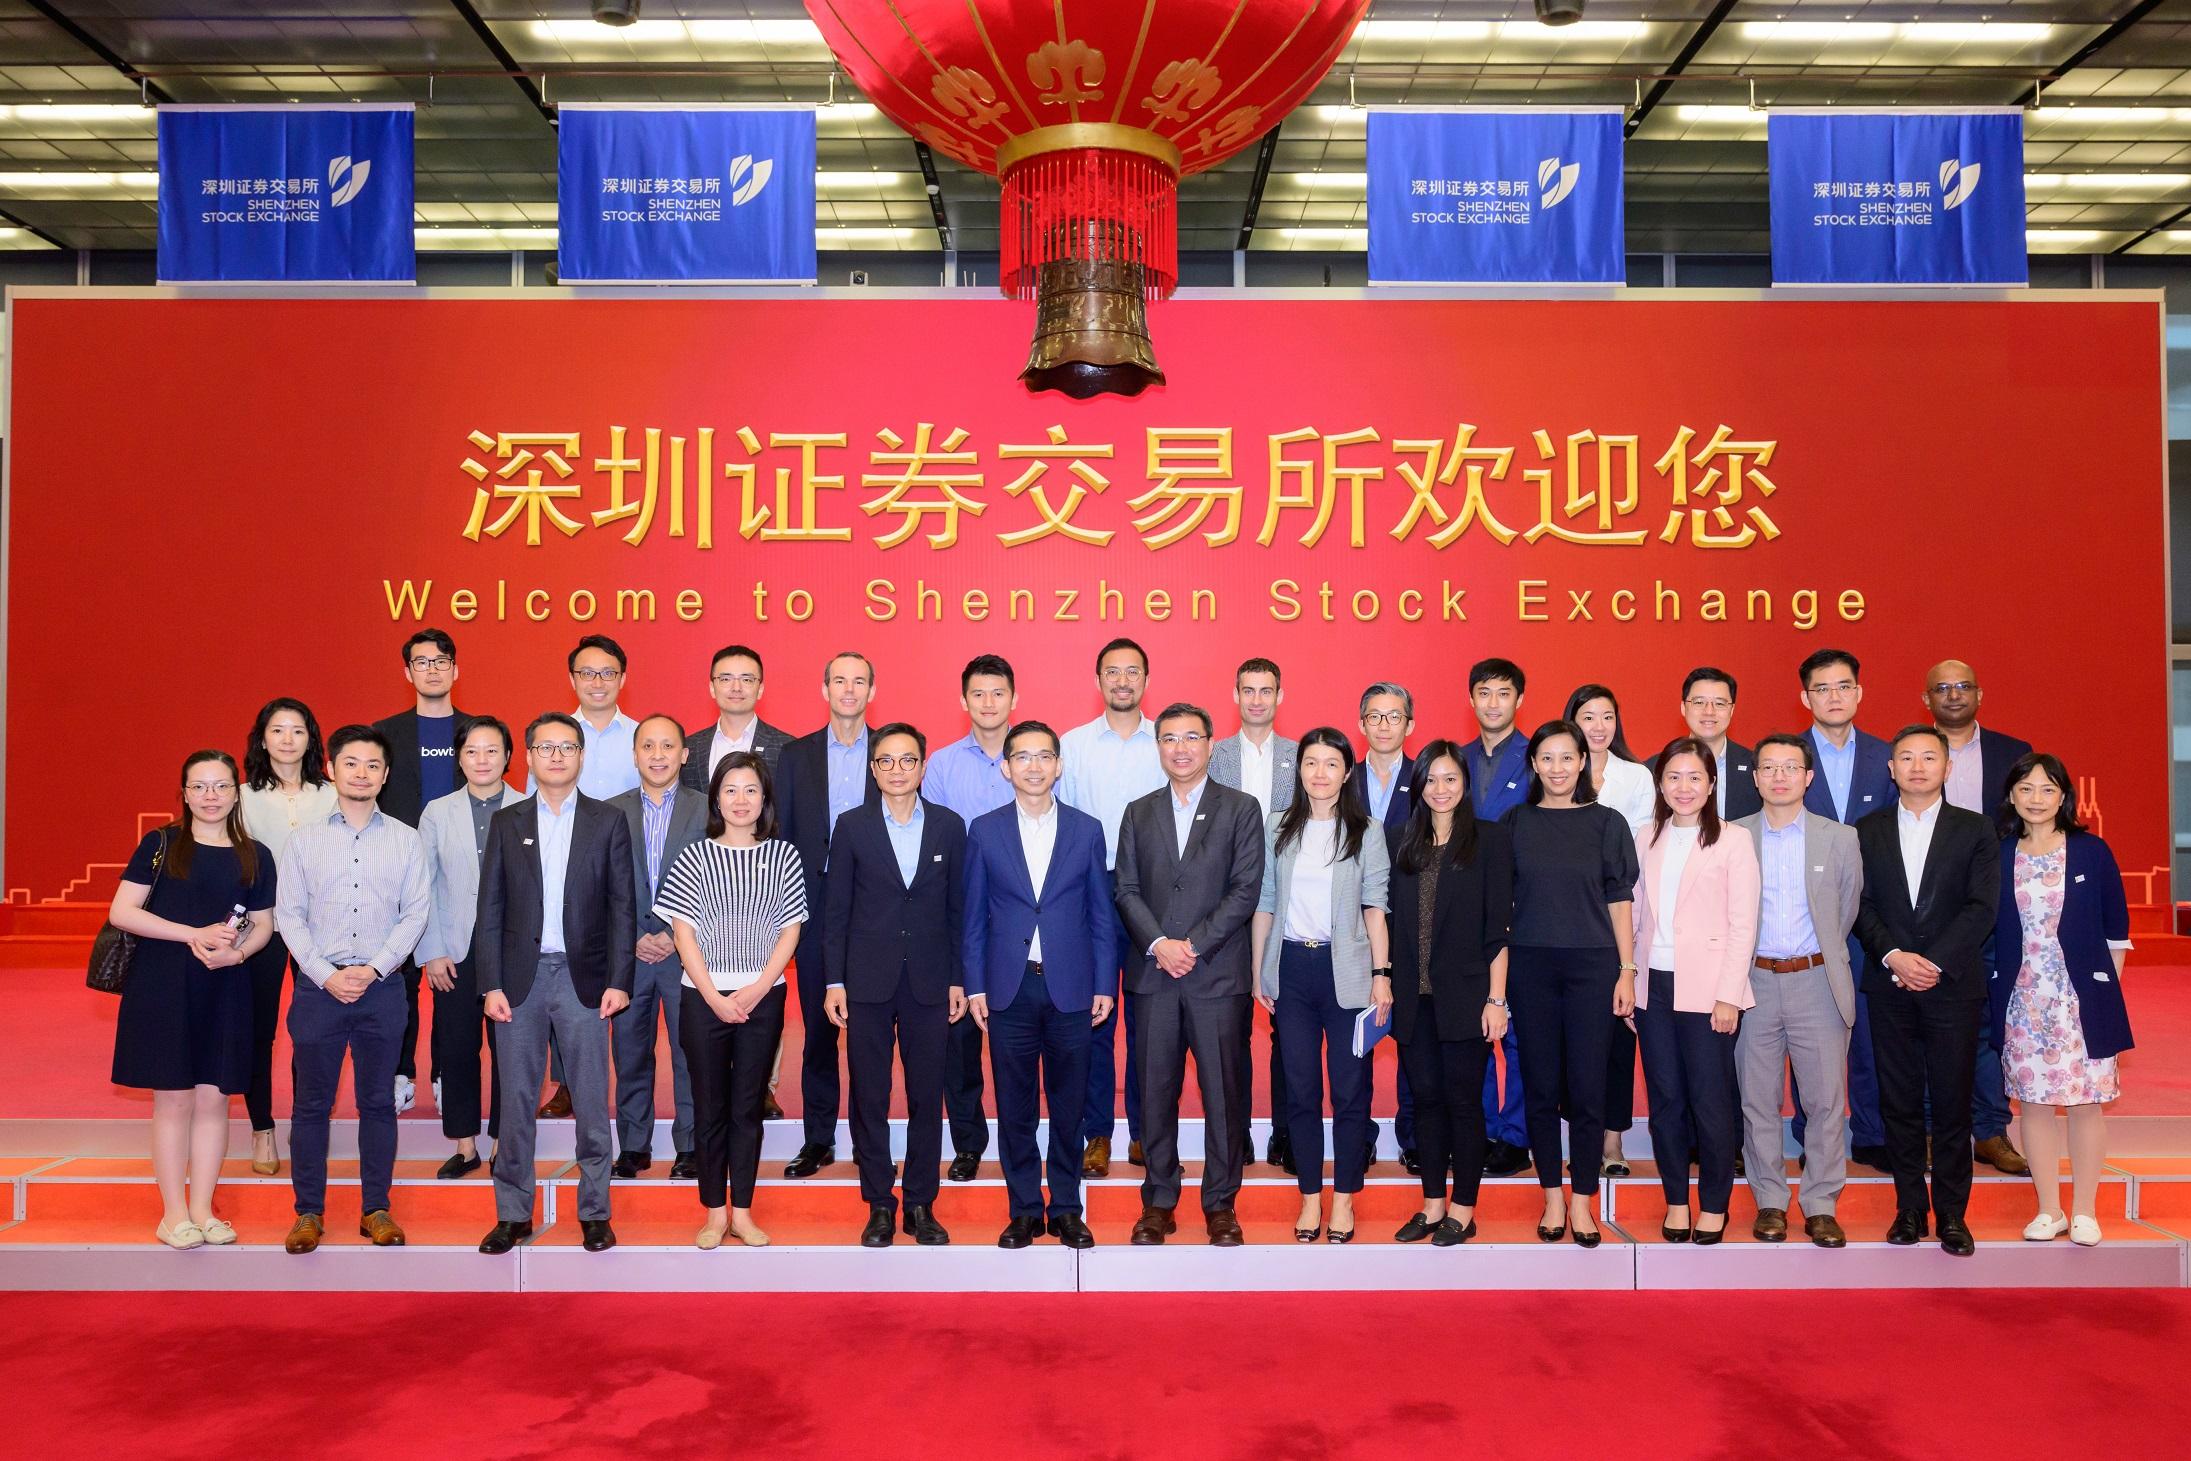 A delegation of participants of the Hong Kong Academy of Finance Financial Leaders Programme (FLP) completed the inaugural FLP field trip to Shenzhen from September 24 to 27. The FLP cohorts visit the Shenzhen Stock Exchange.